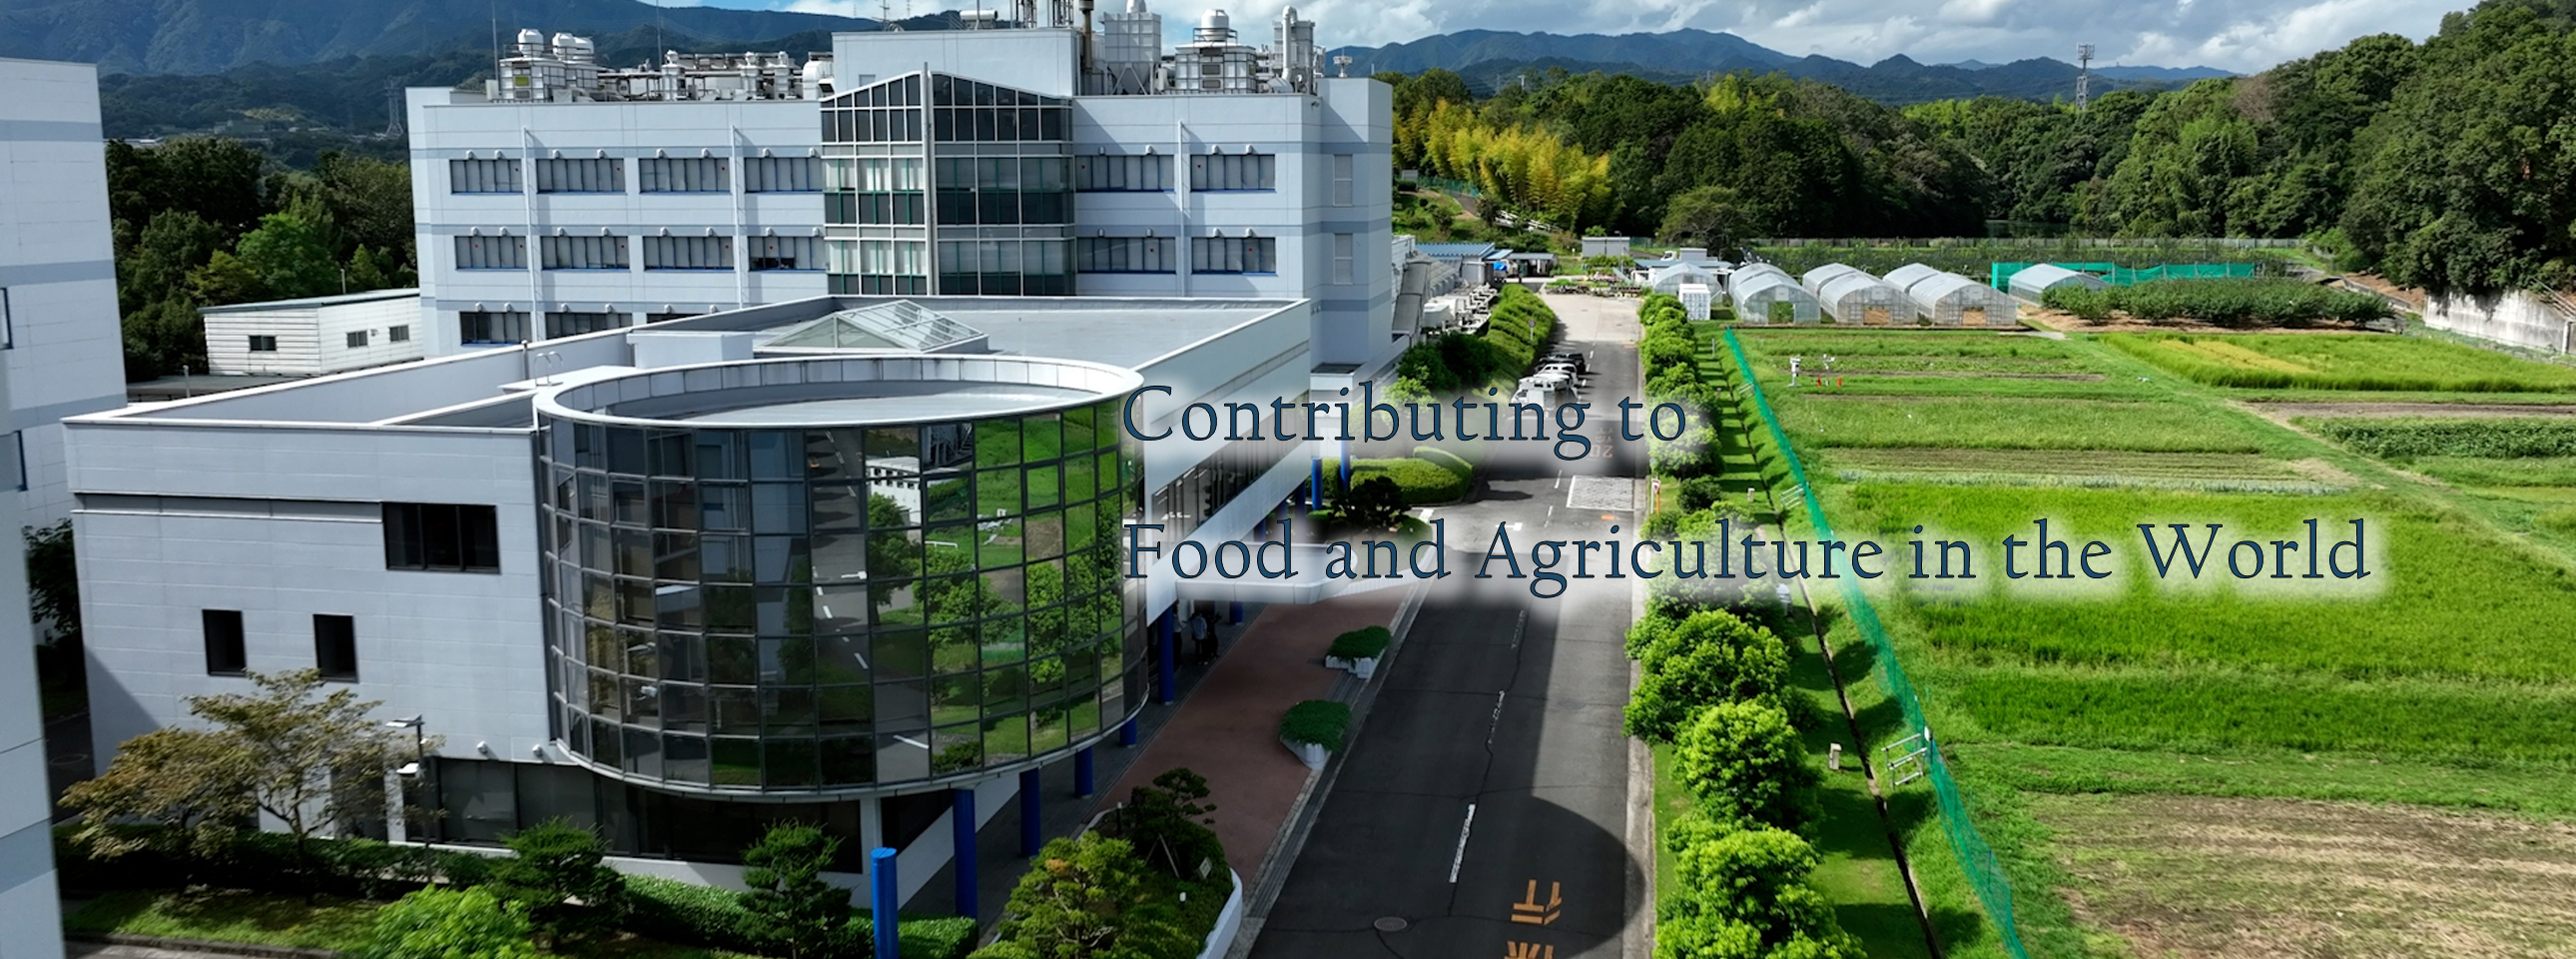 Contributing to Food and Agriculture in the World